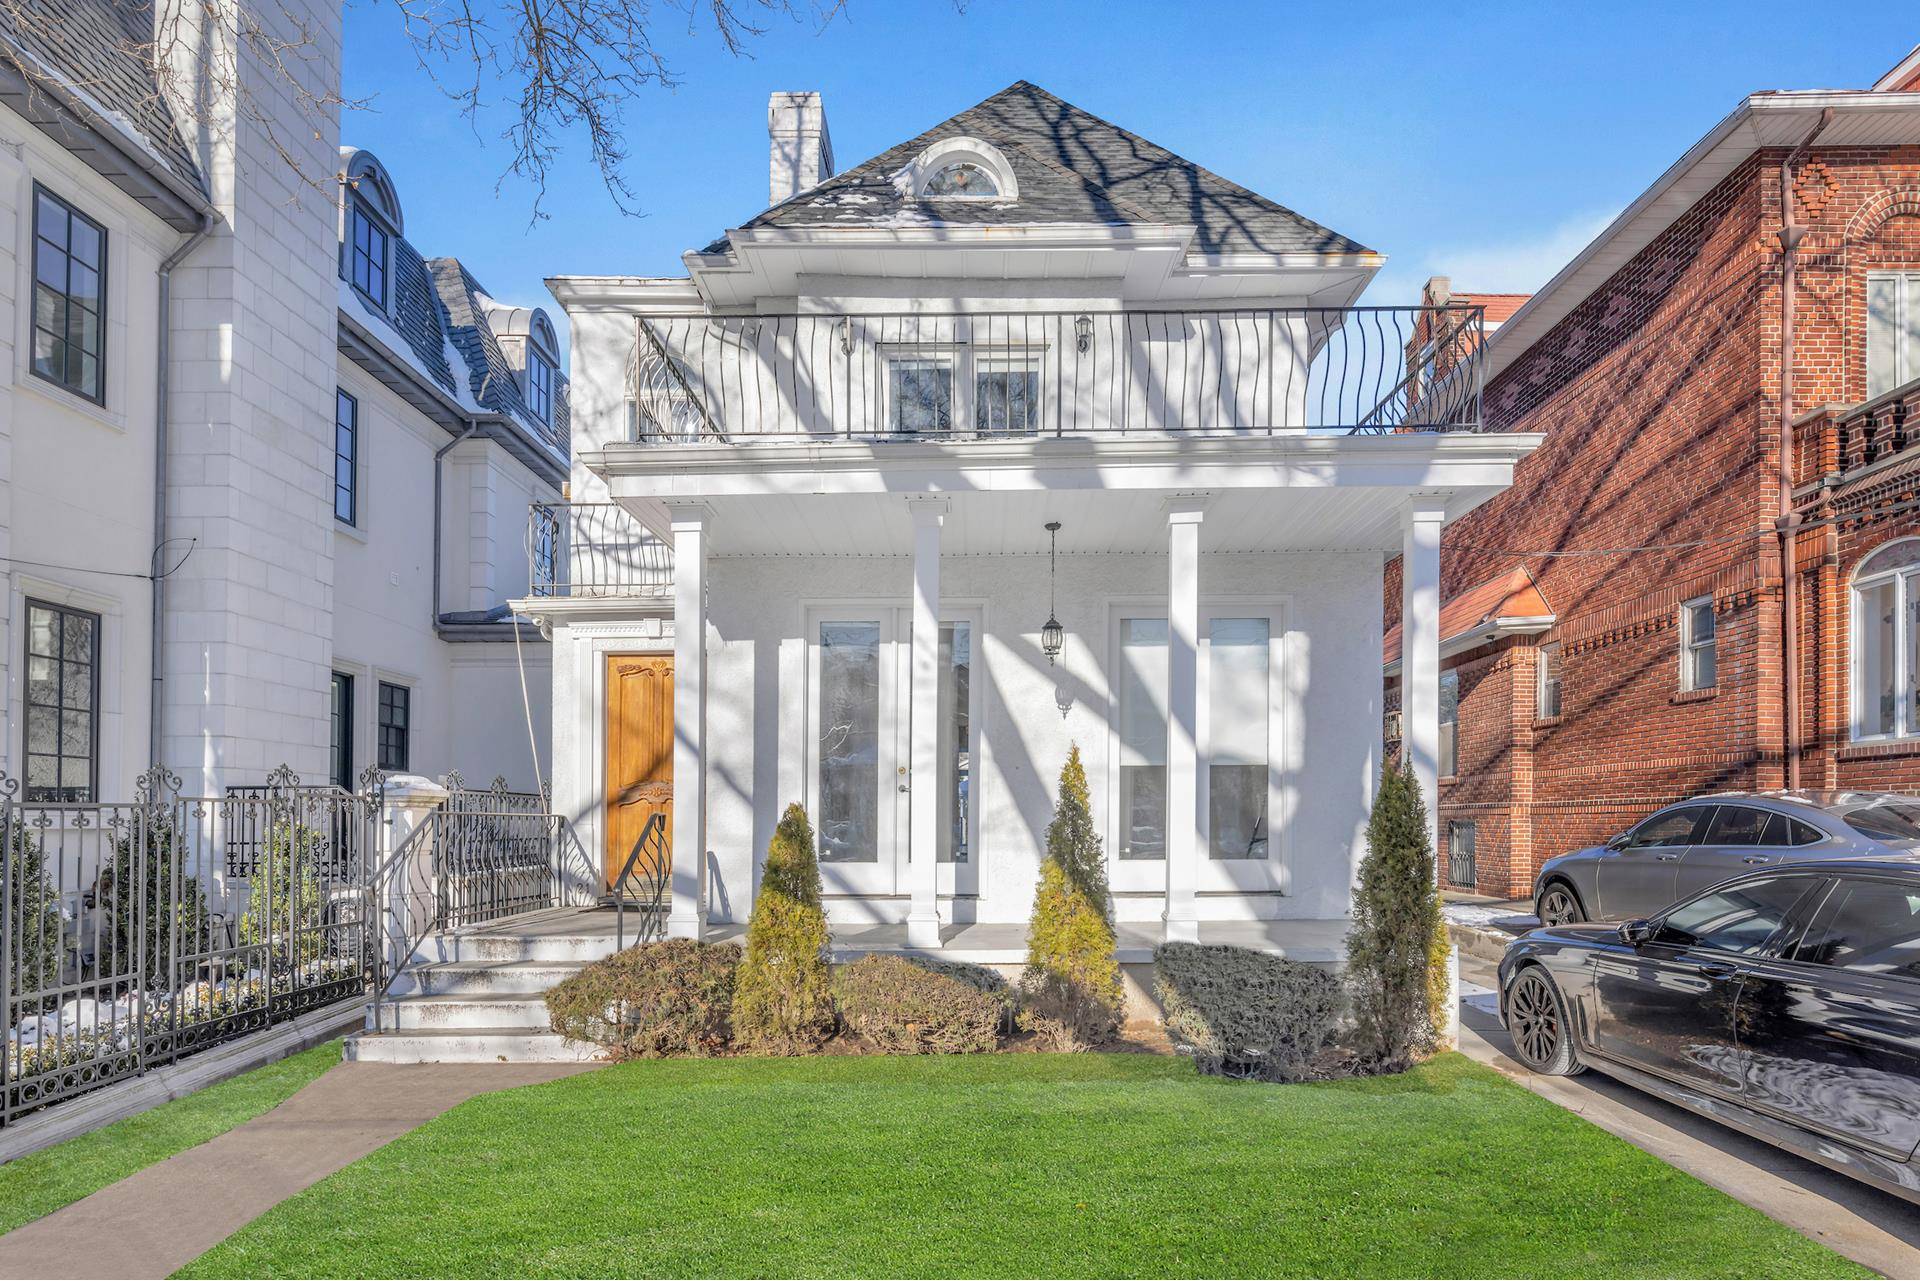 This amazing detached white stucco home sits on the best block in Bay Ridge, Brooklyn and has been a mainstay of the neighborhood since 1920 when it was built.